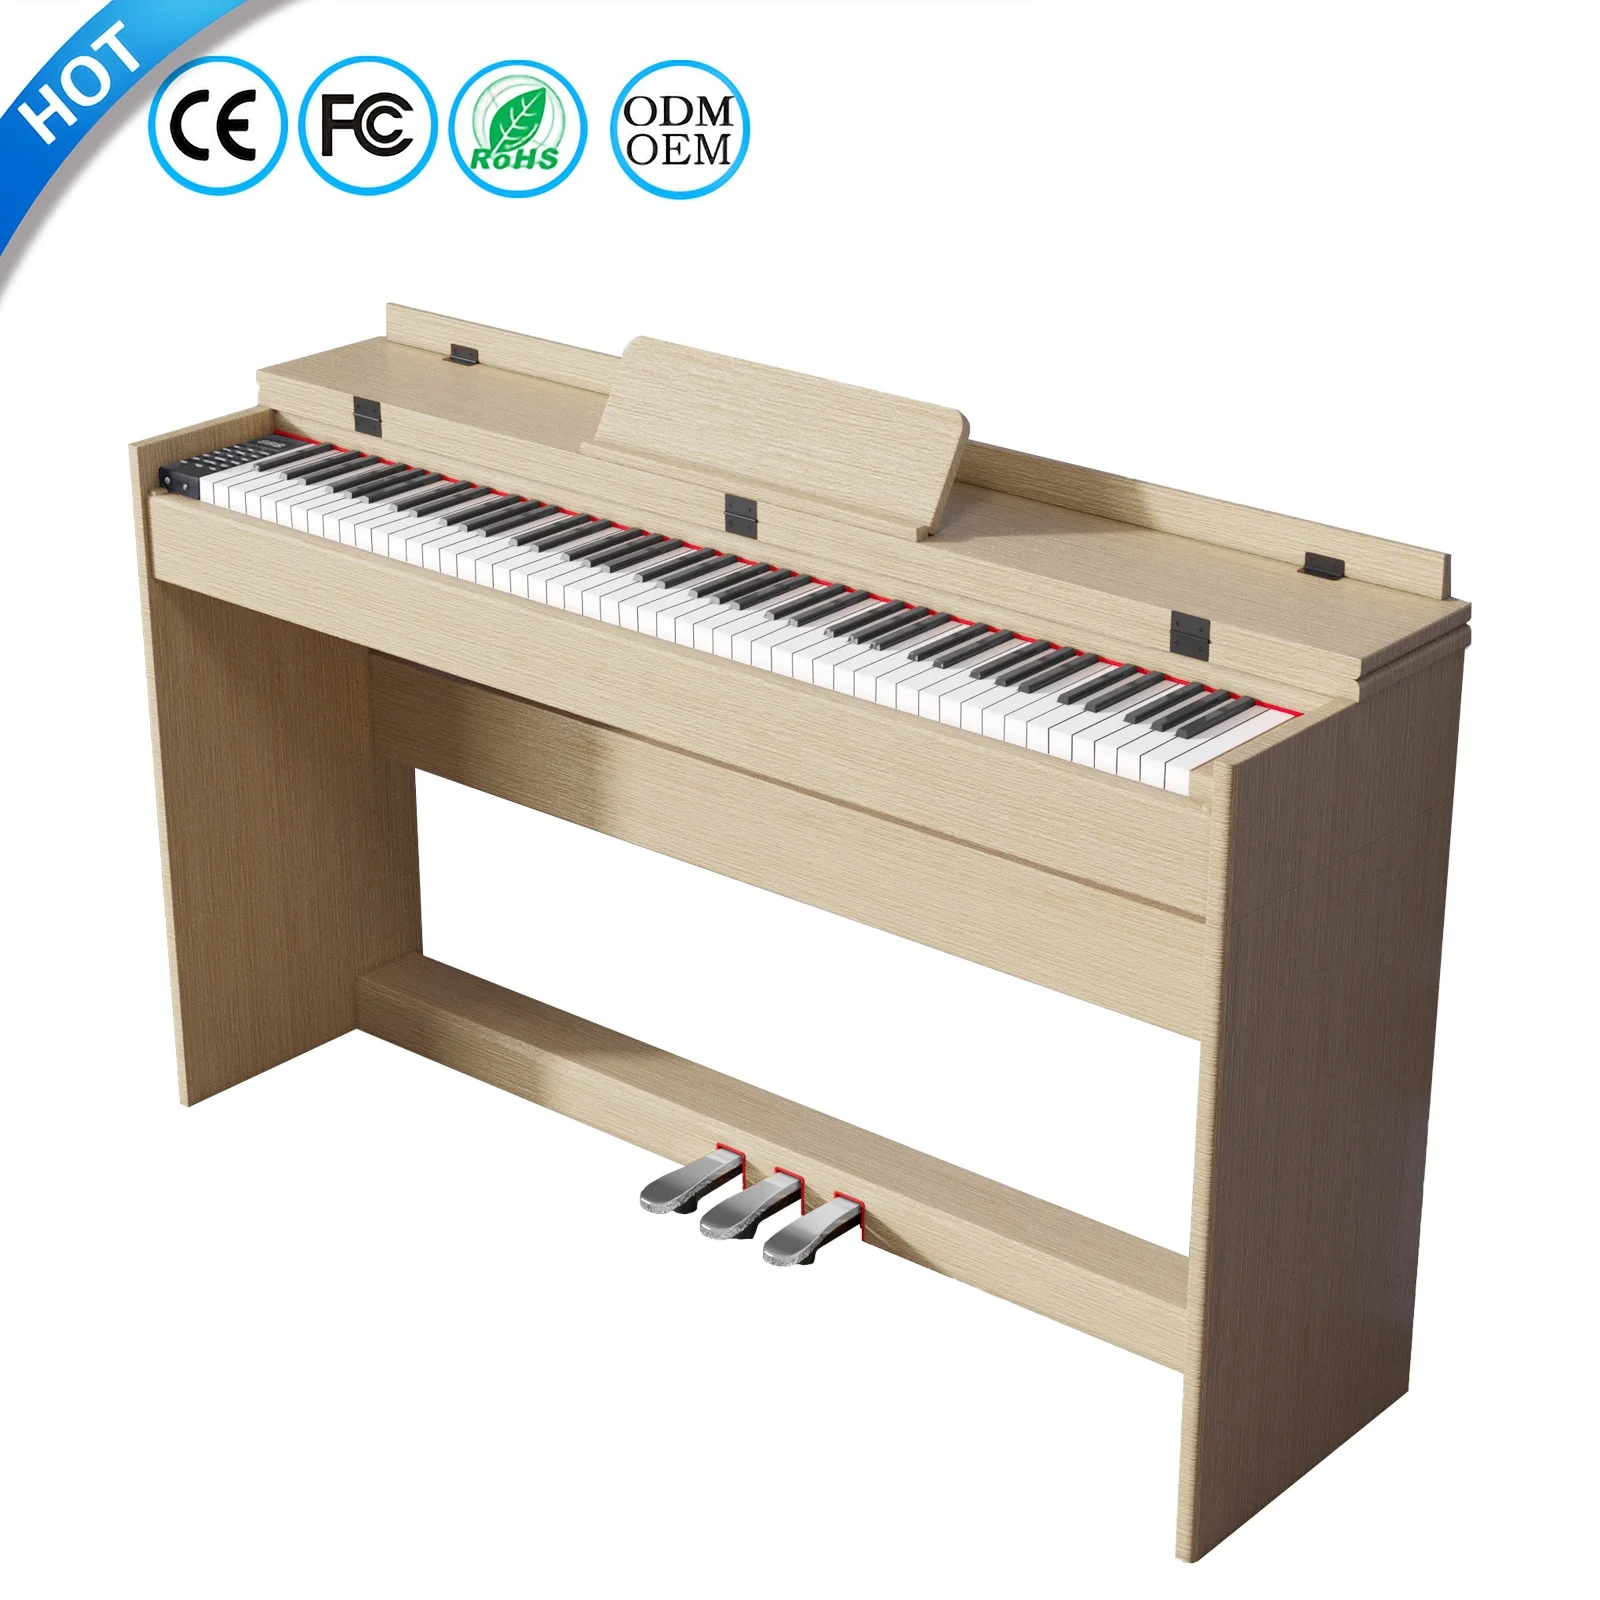 Begging Recur tolerance Children Piano Weighted Keyboard Piano Roll Up 88 Keys Digital China Used Piano  Electronic Organ - Buy Children Piano,Used Piano,Roll Up Piano 88 Keys  Product on Alibaba.com